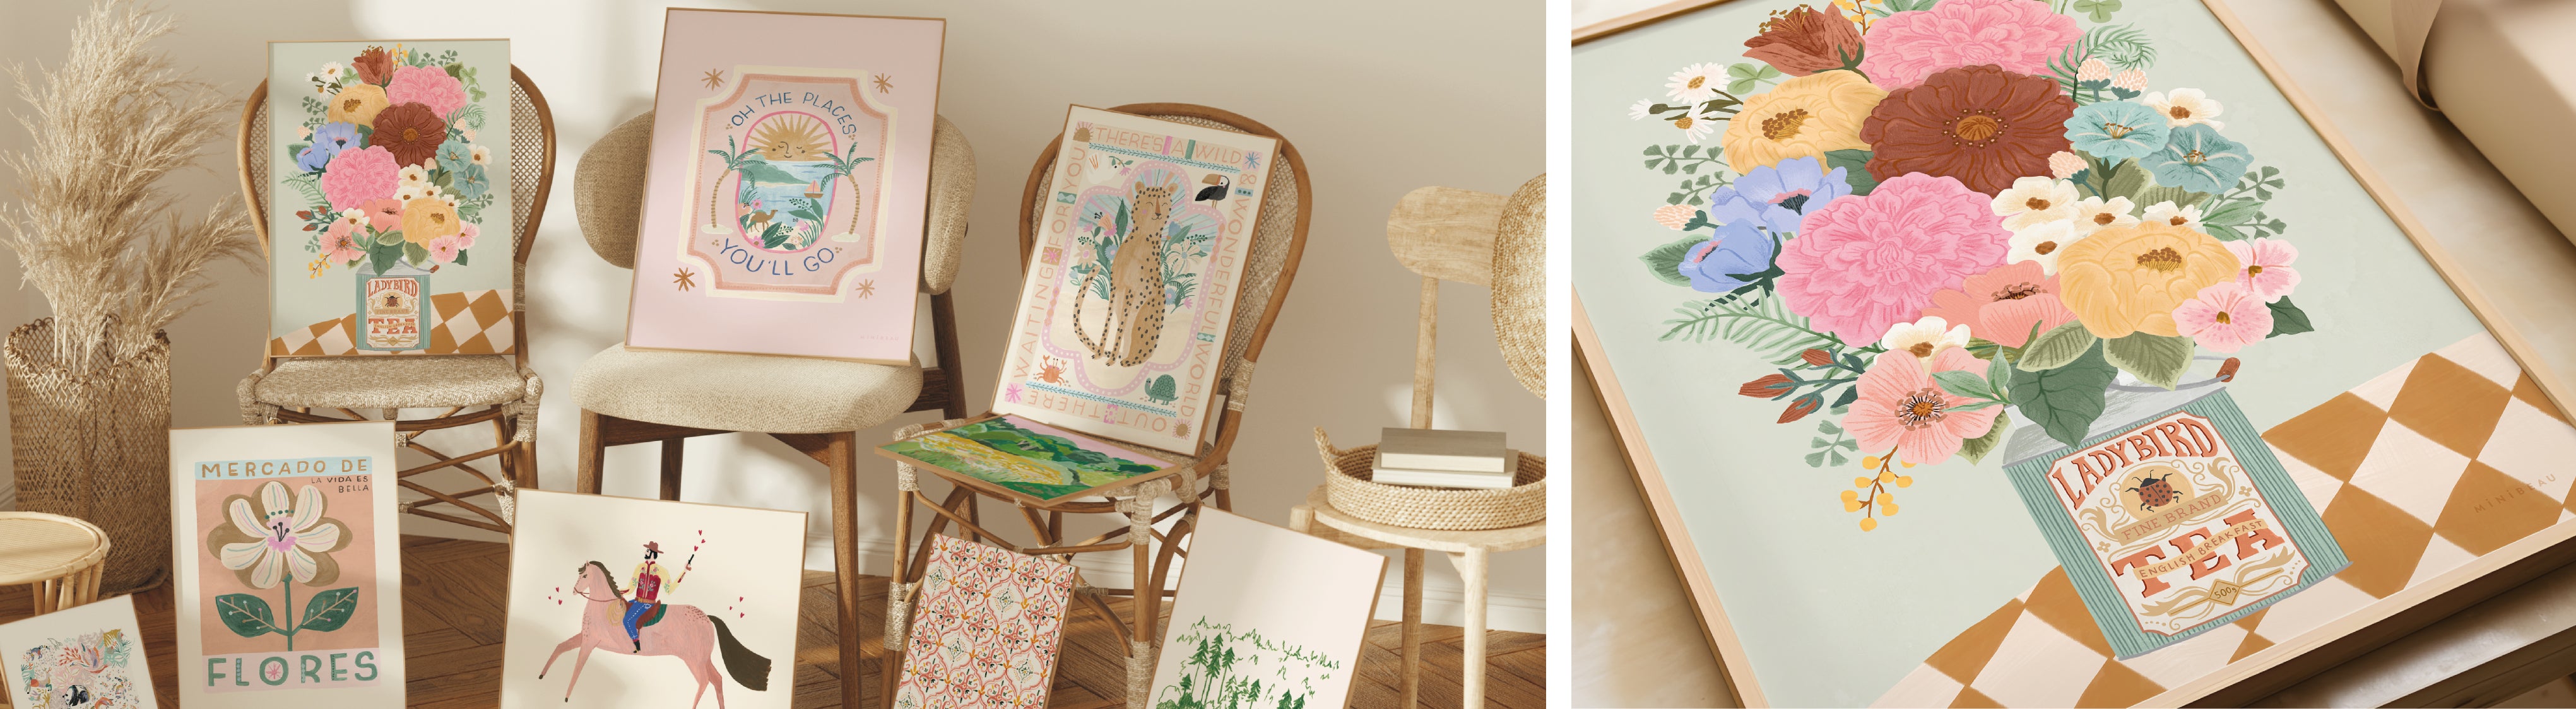 Banner showing art prints from the wild bohemia collection propped up against and on chairs